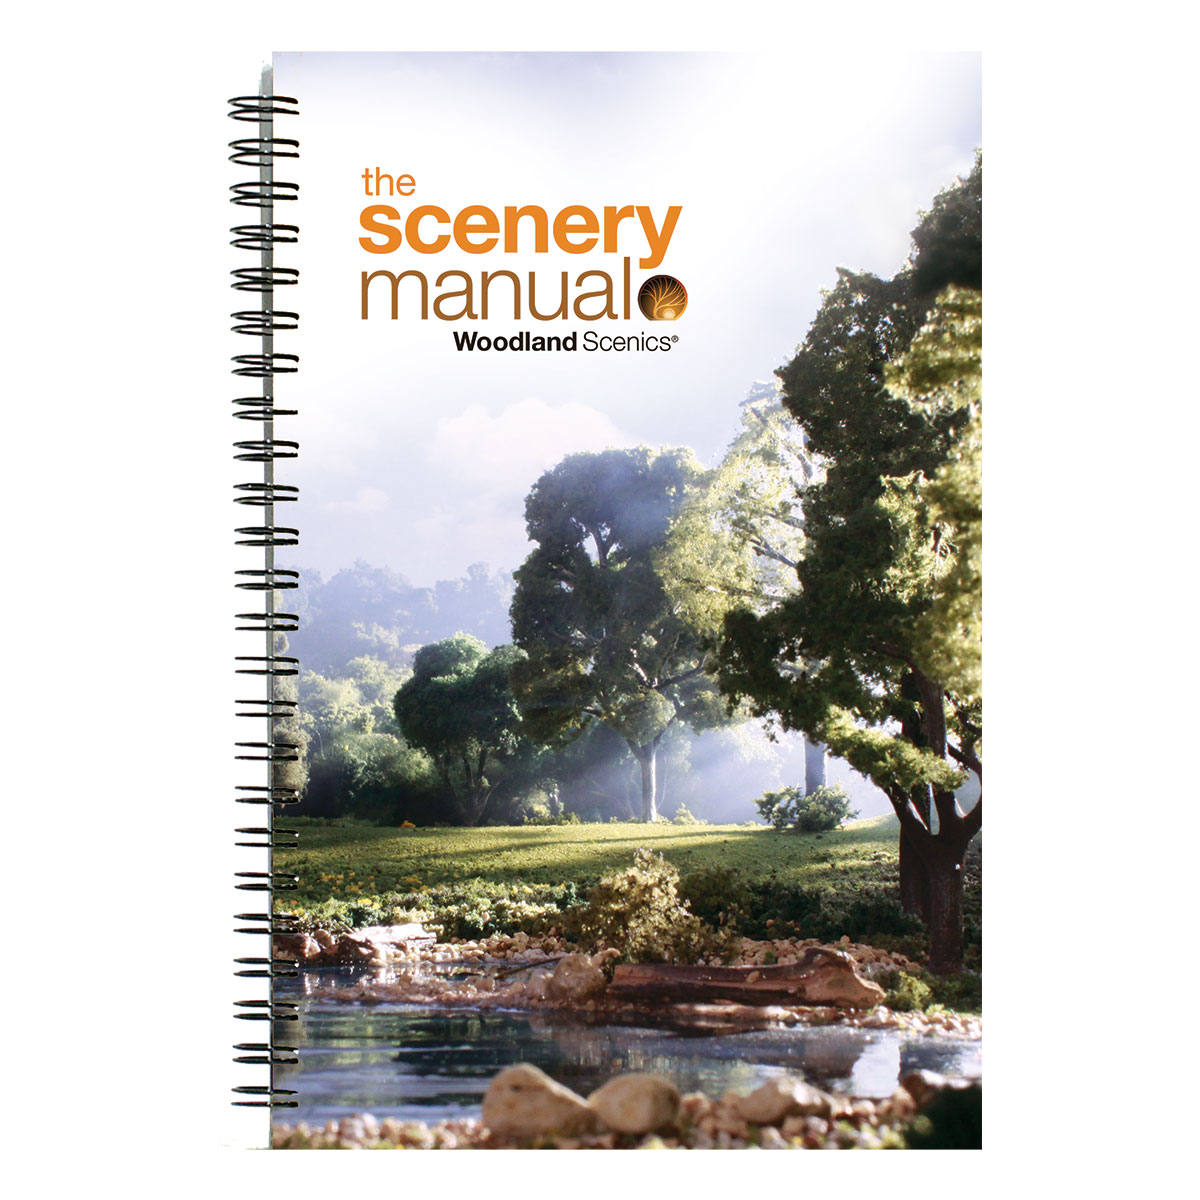 The Scenery Manual - The Scenery Manual is no longer in stock or available for purchase